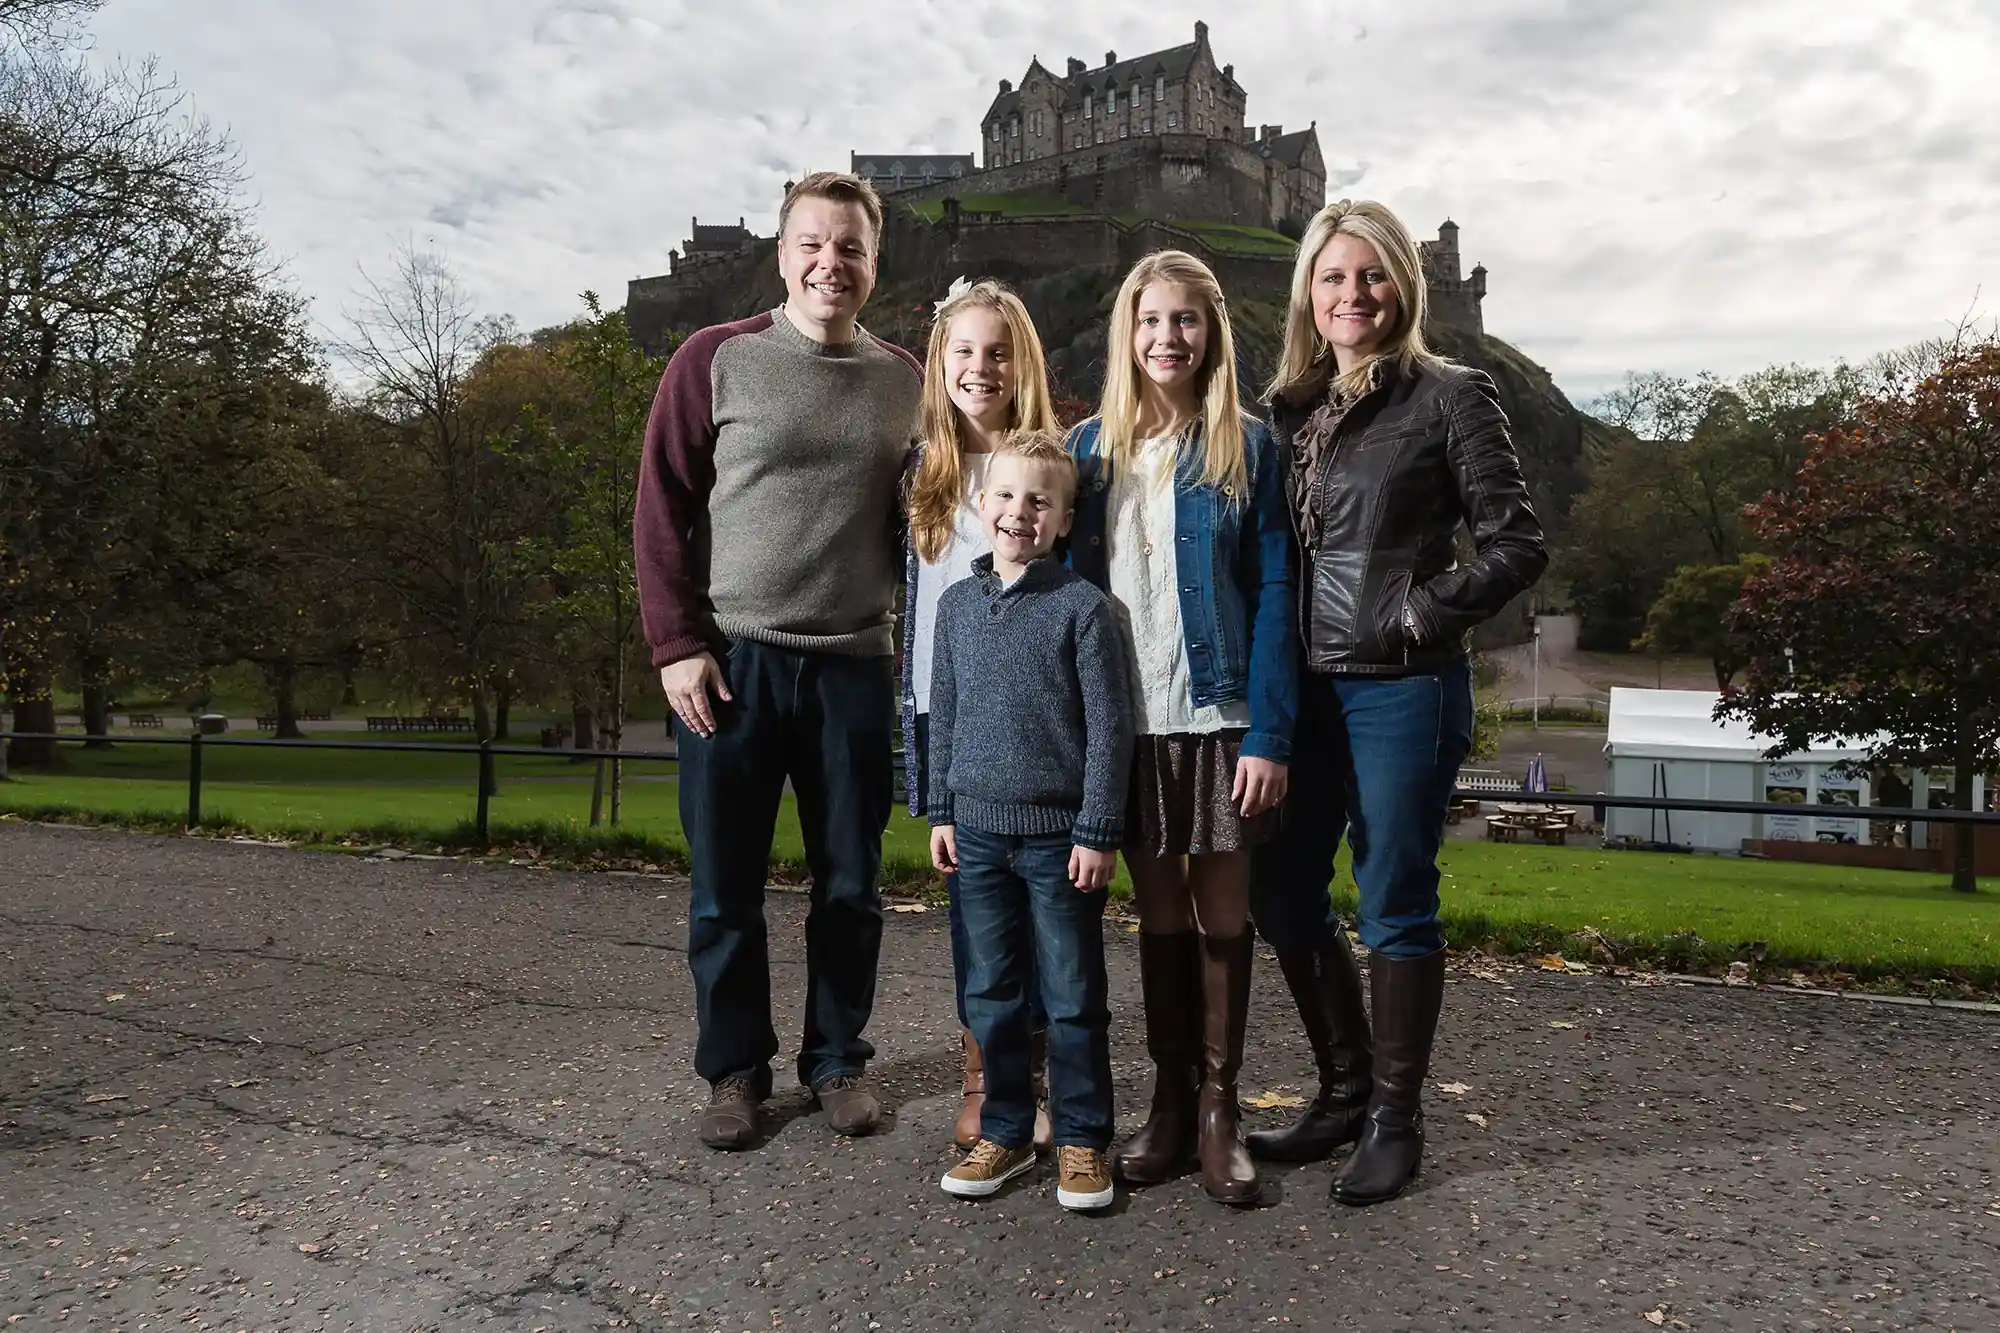 A family of five stands on a paved path with greenery and a large castle in the background. The group includes two adults and three children, all dressed in casual clothing.